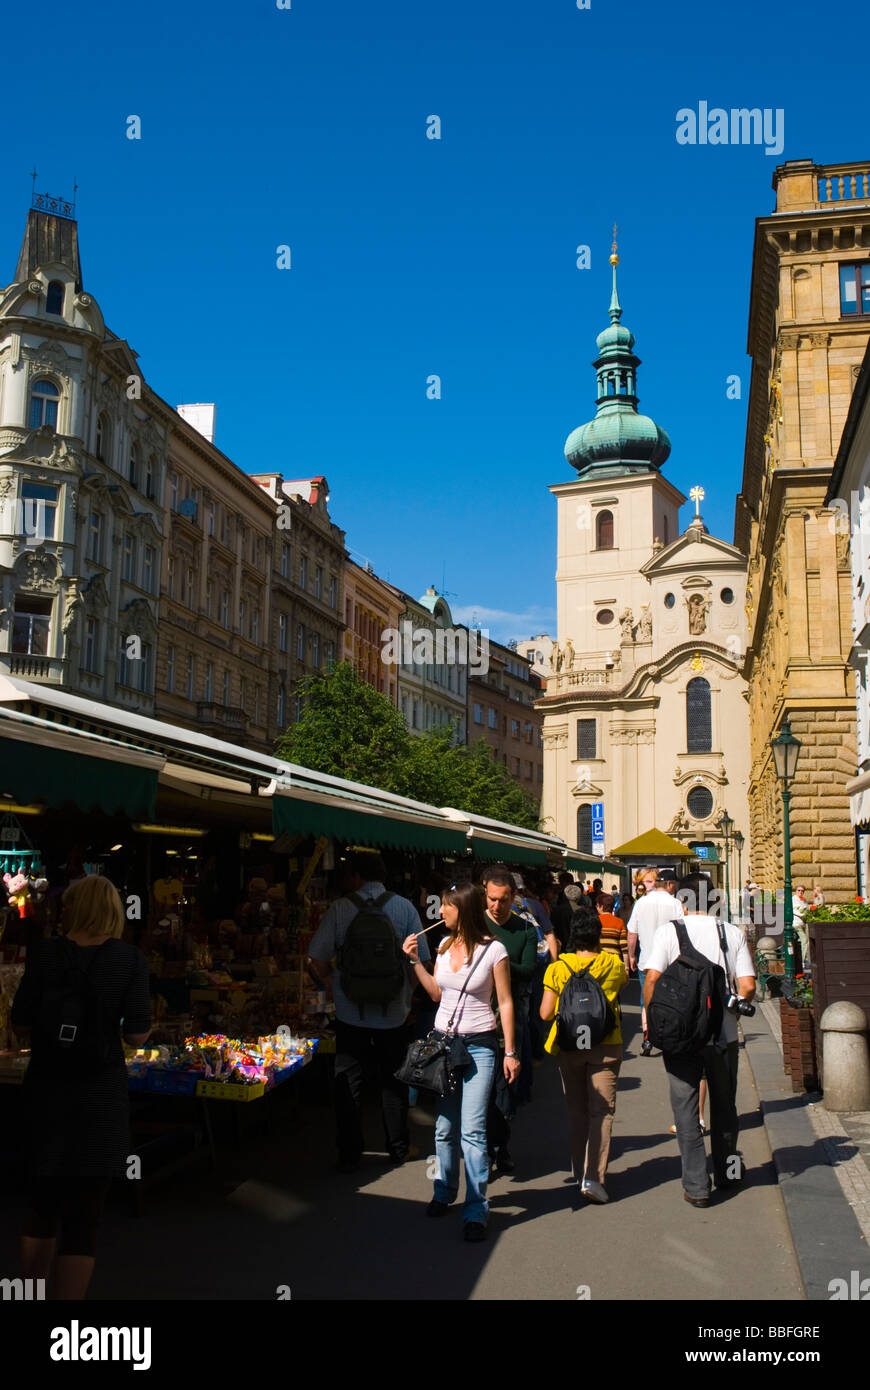 Havelska market street with Sv Havel church in background in old town Prague Czech Republic Europe Stock Photo